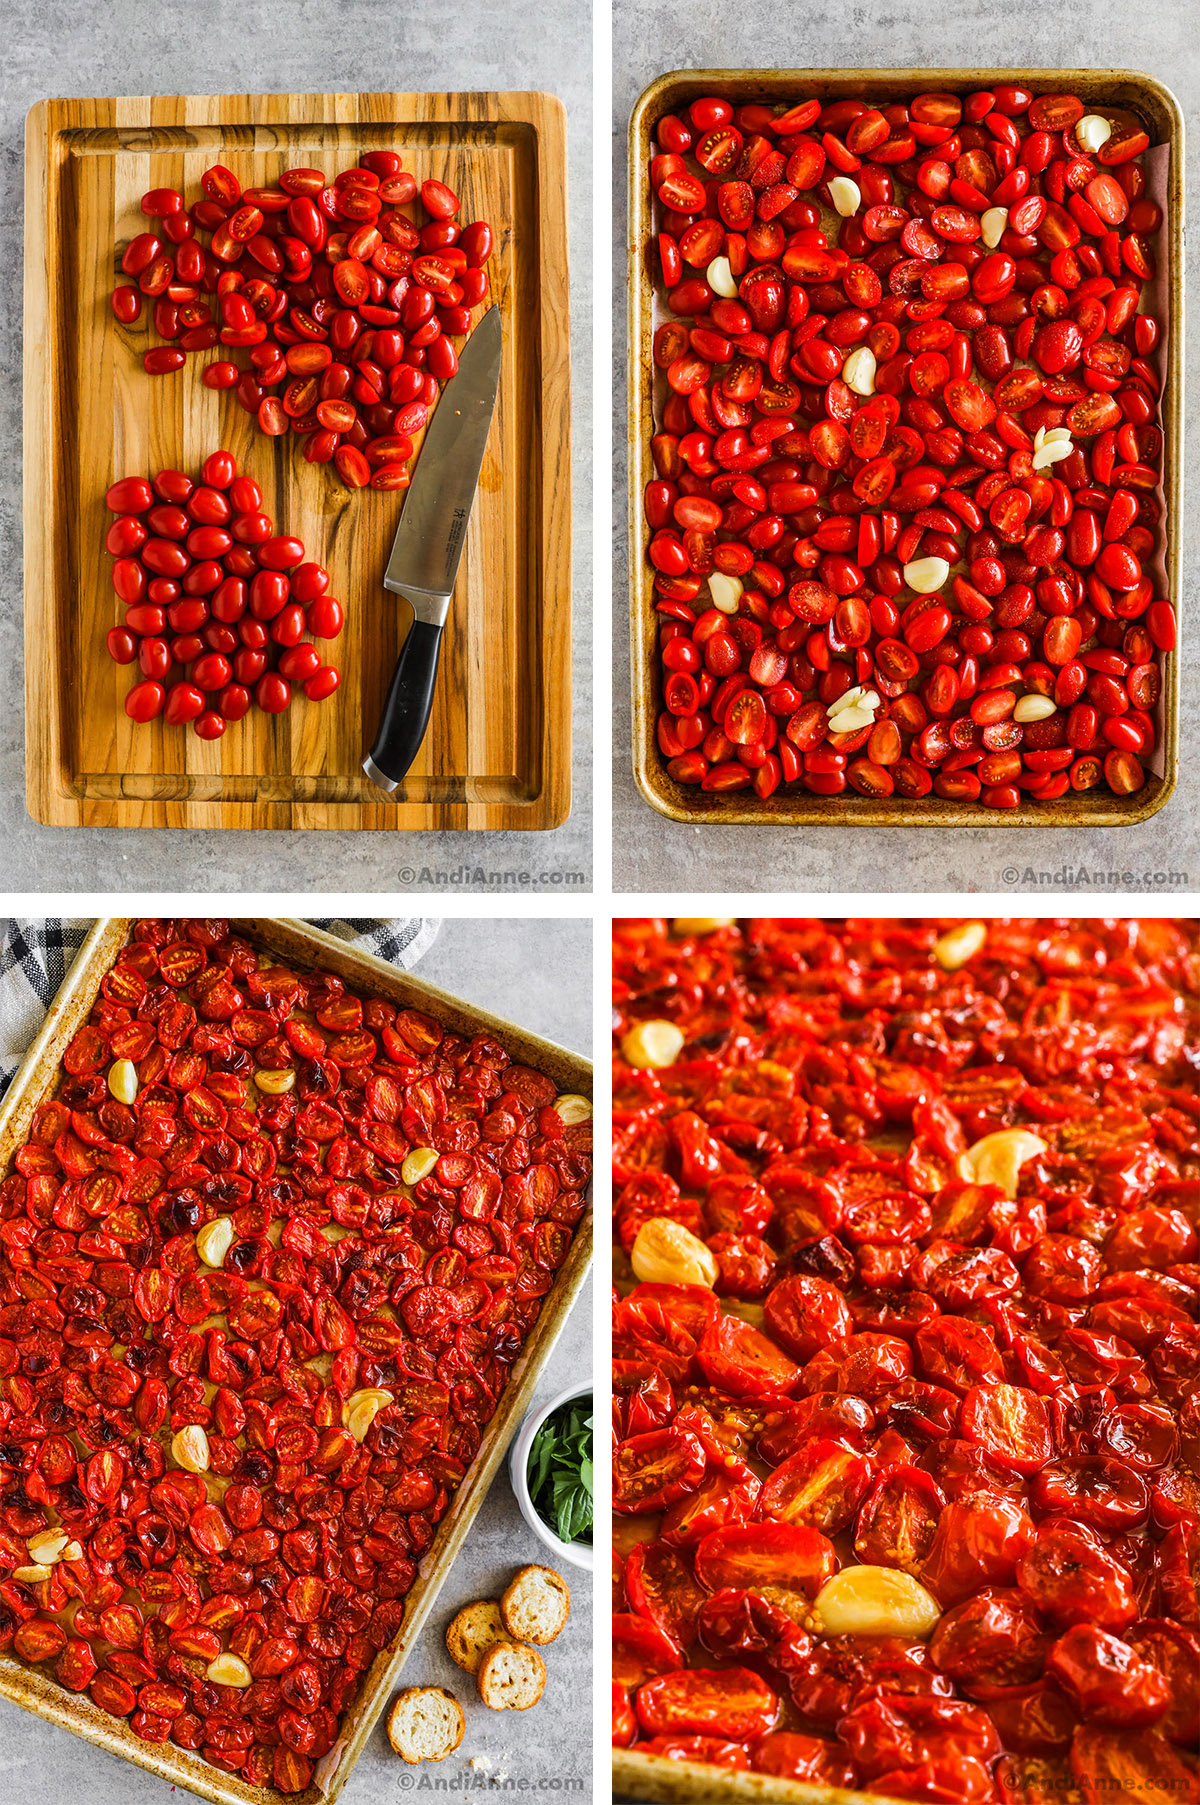 Four images grouped together. First is sliced grape tomatoes, second is sliced tomatoes on baking sheet, third and fourth are cooked sliced tomatoes on baking sheet with garlic cloves.